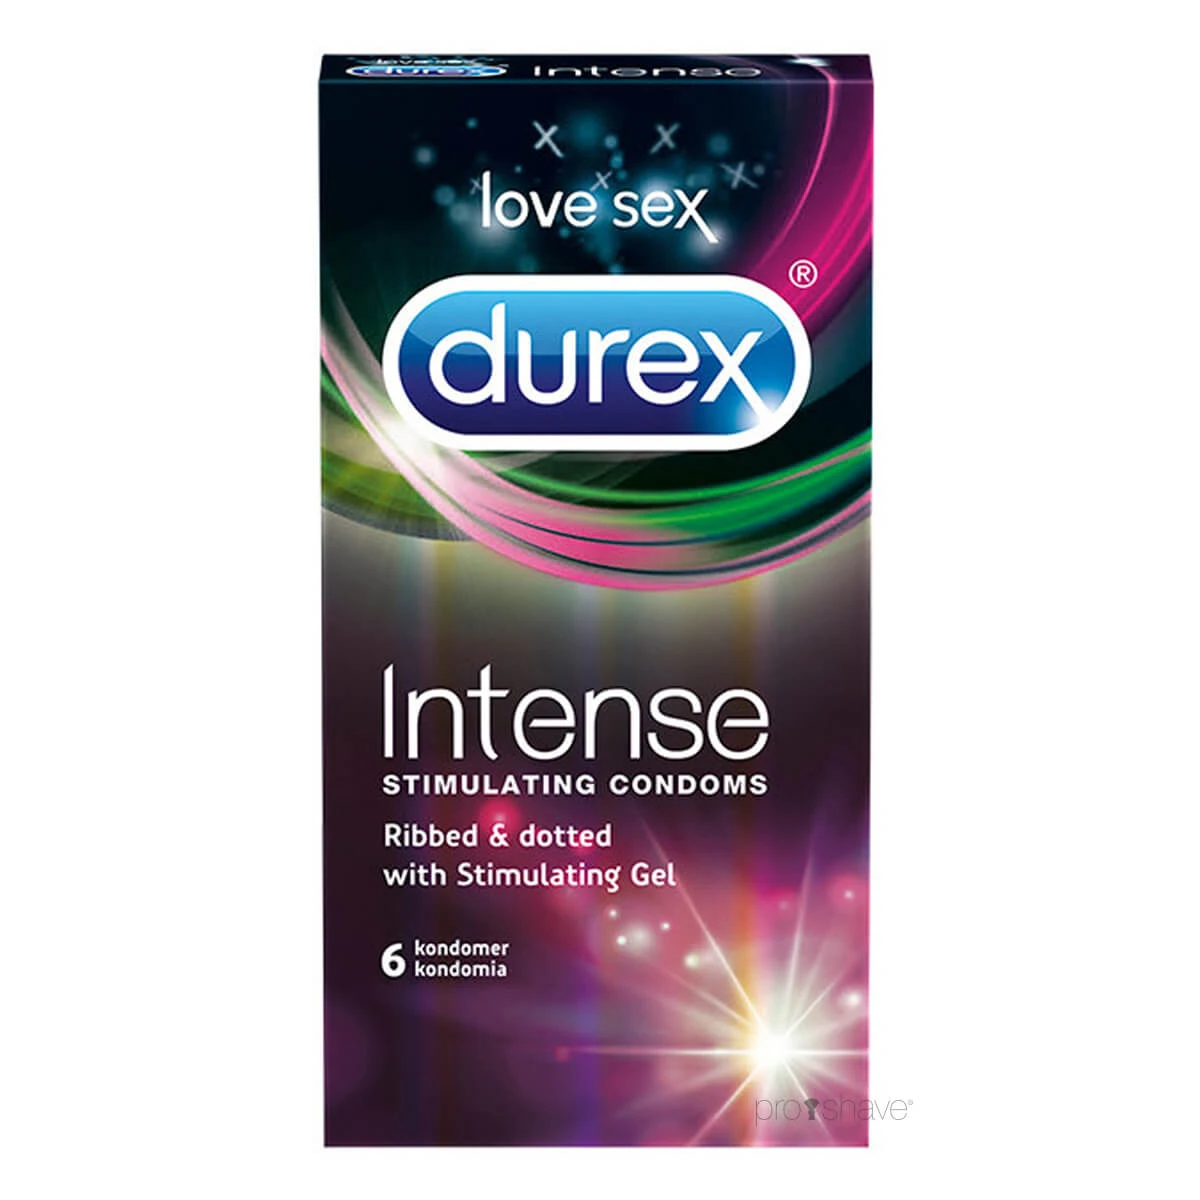 Condoms and lube - See the selection here